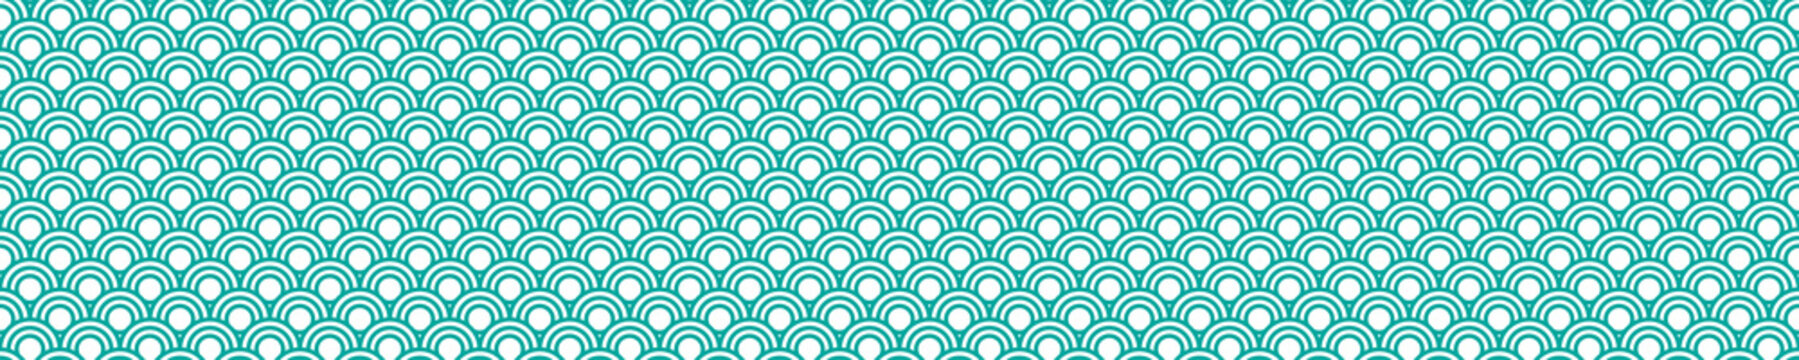 Blue seamless pattern with traditional Japanese waves